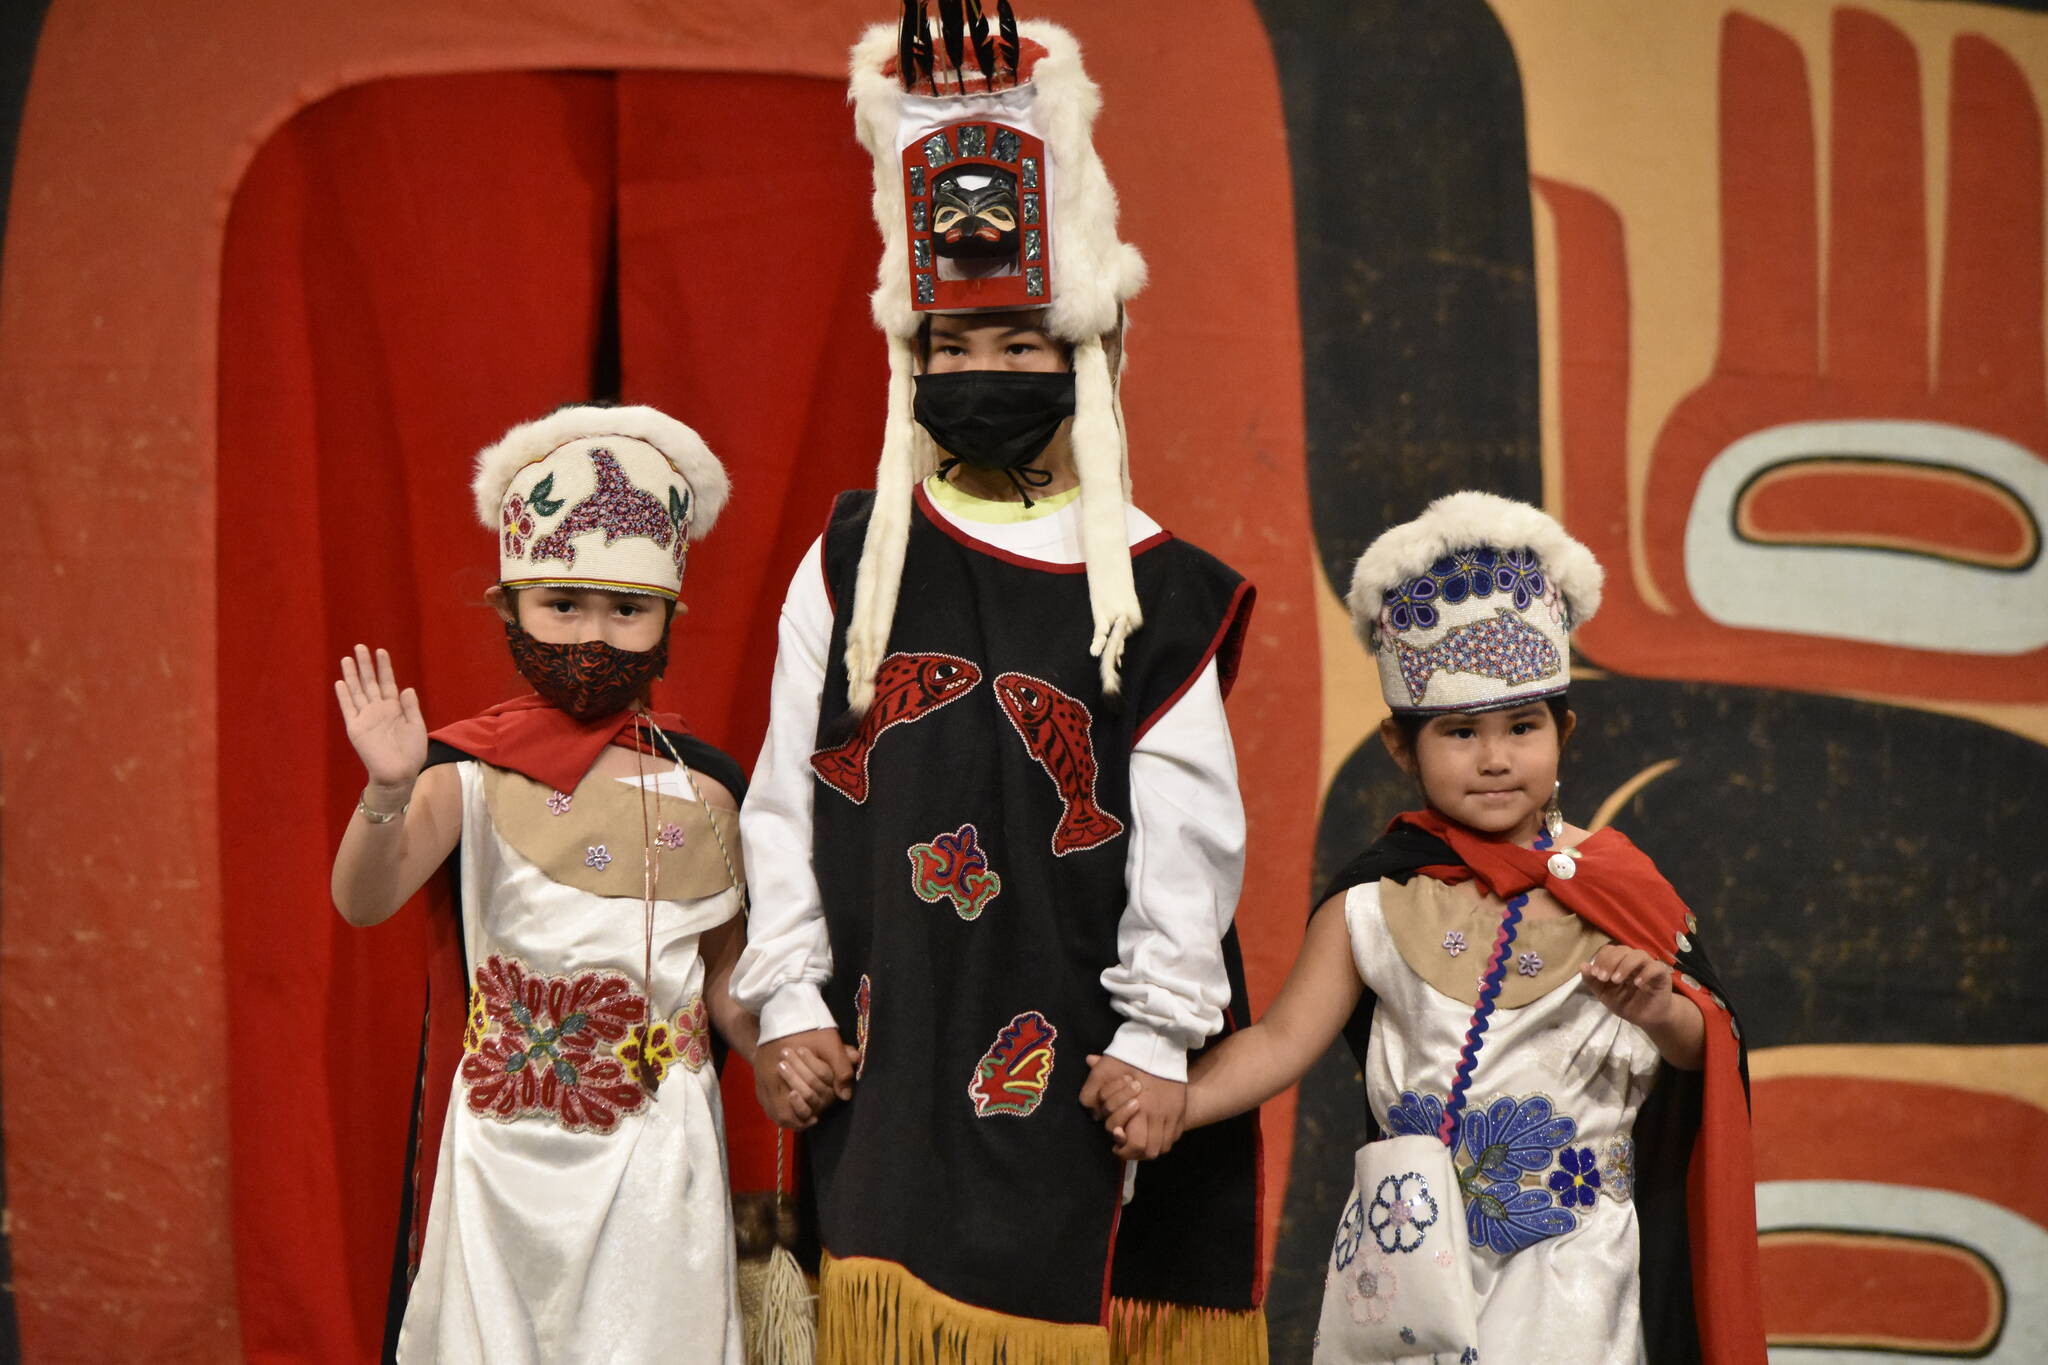 From left to right, Saige Jack, with cousins Zayn and Blake Johnson, show off their regalia - a mix of Tlingit and Athabascan pieces - during the Toddler Regalia Review at Centennial Hall on Friday, June 10, 2022. (Peter Segall / Juneau Empire)